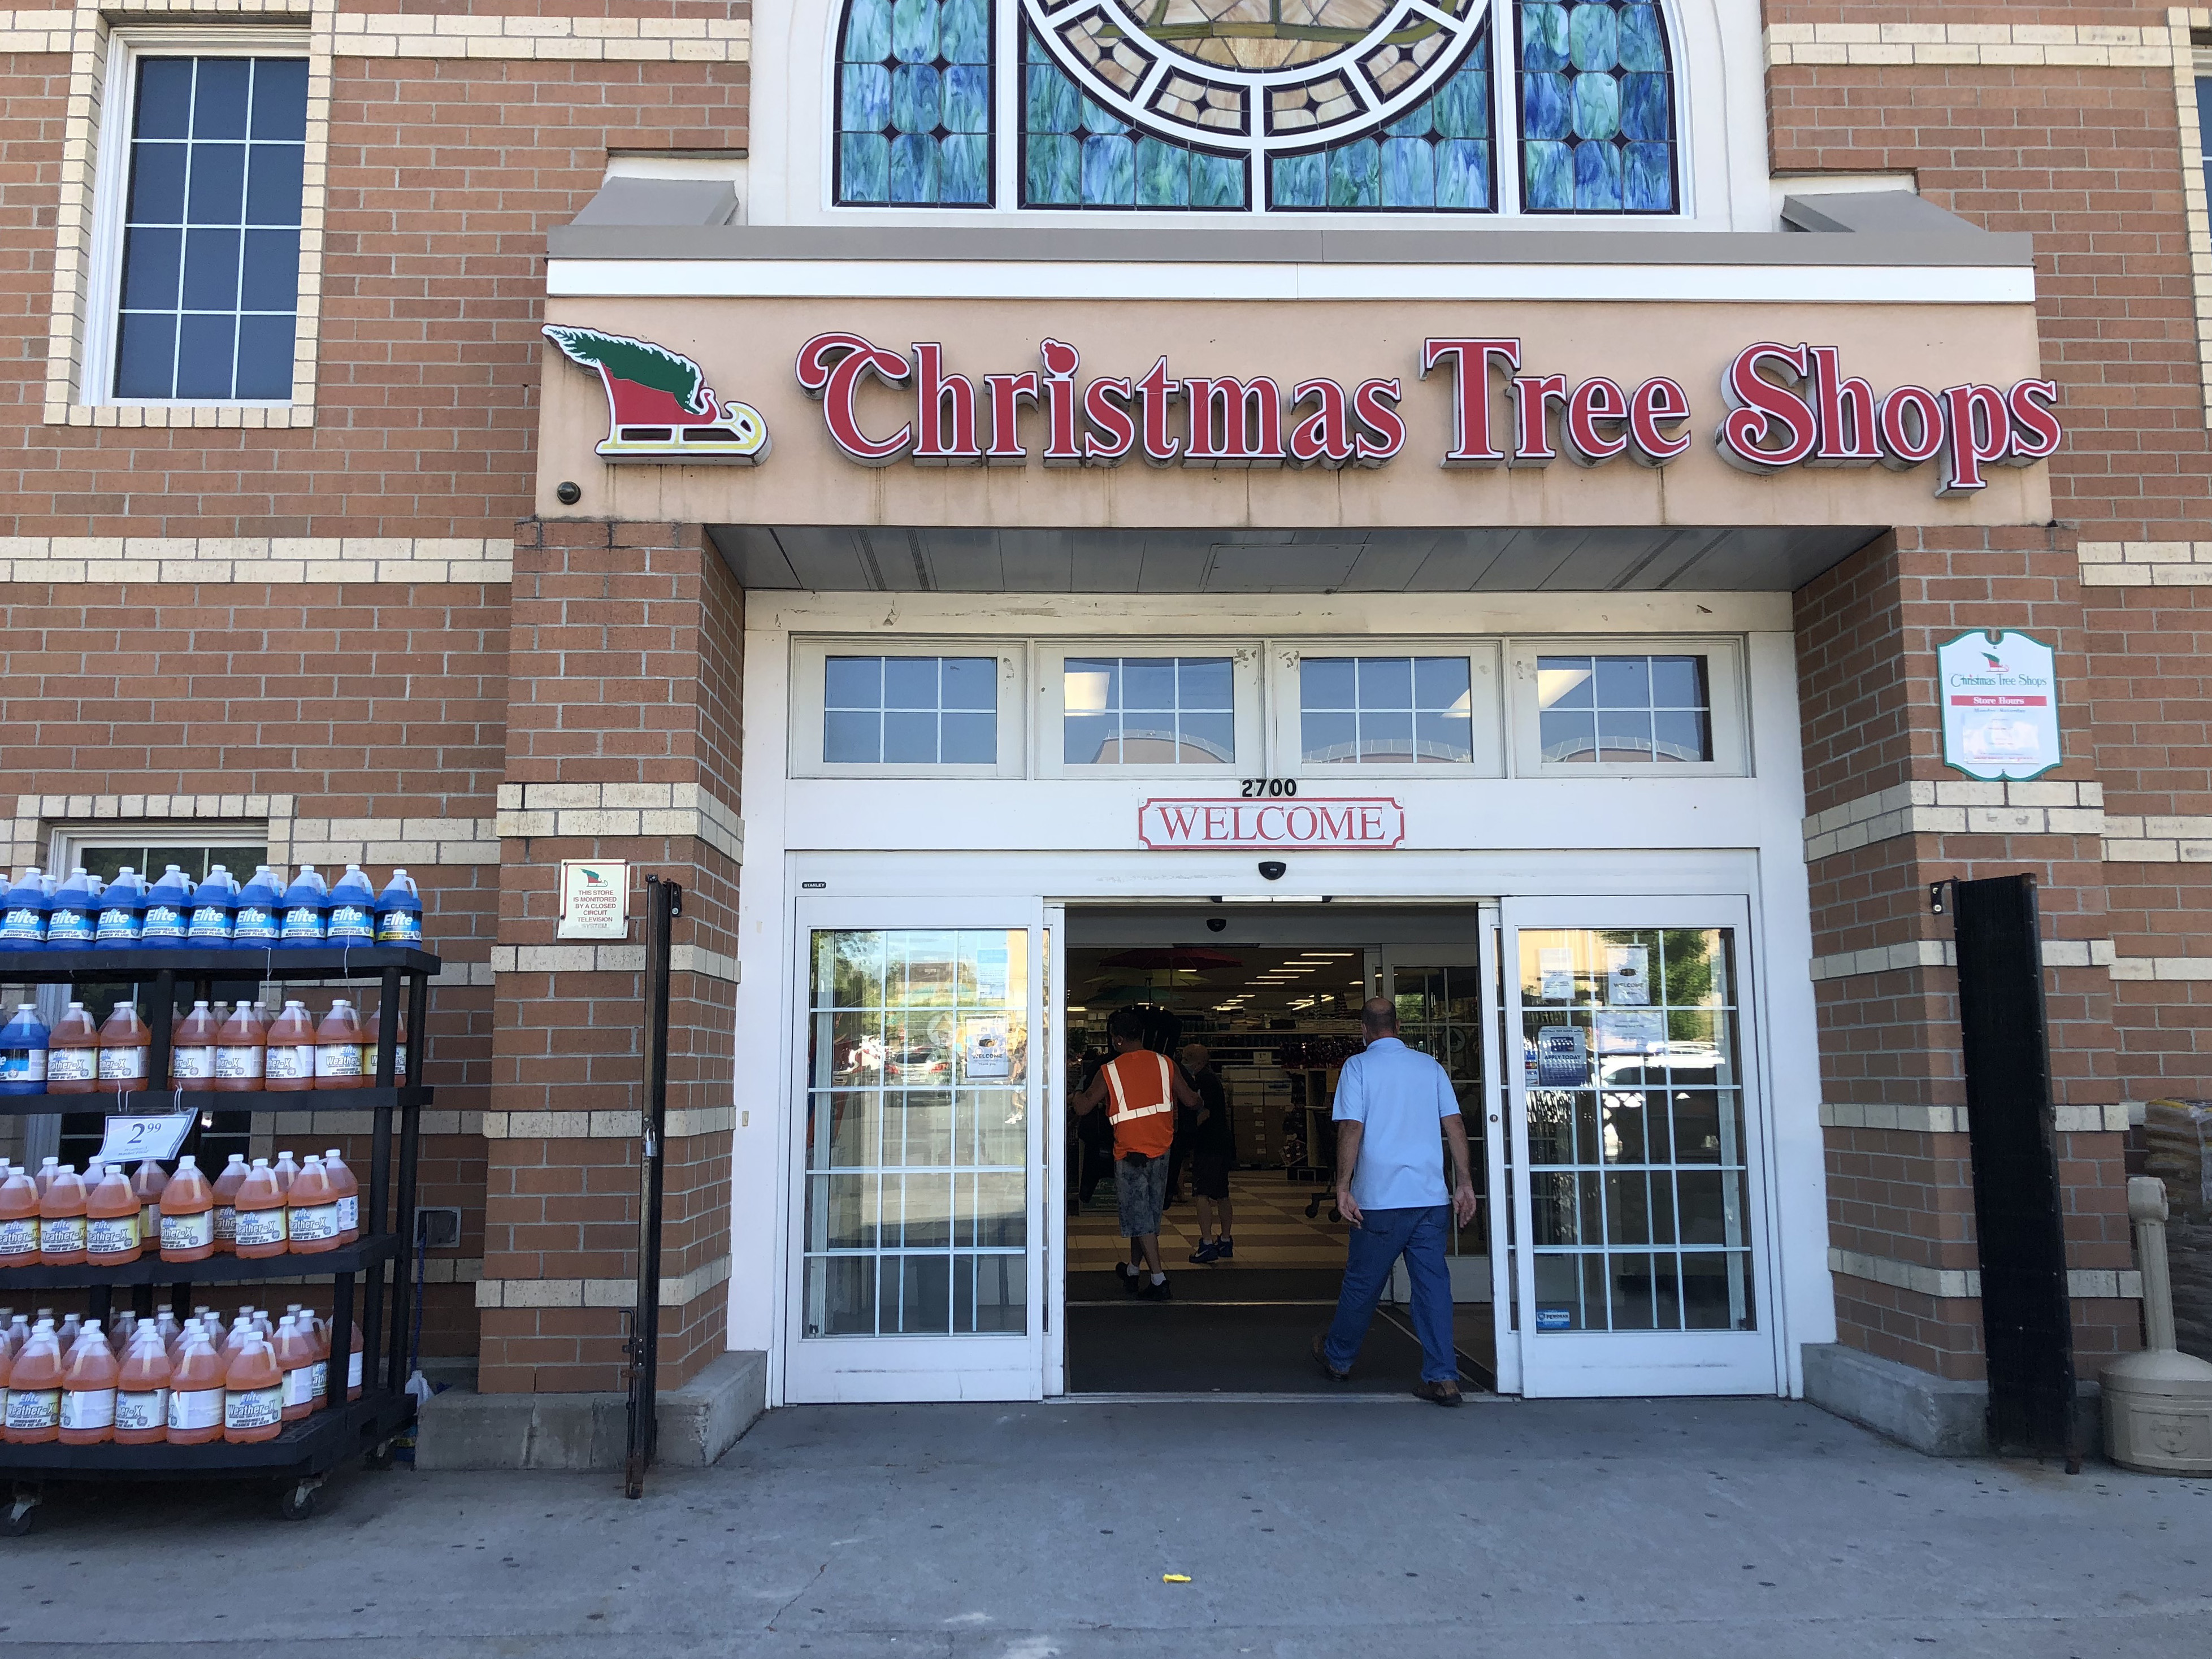 Christmas Tree Shops is latest retailer to file for Chapter 11 bankruptcy - silive.com